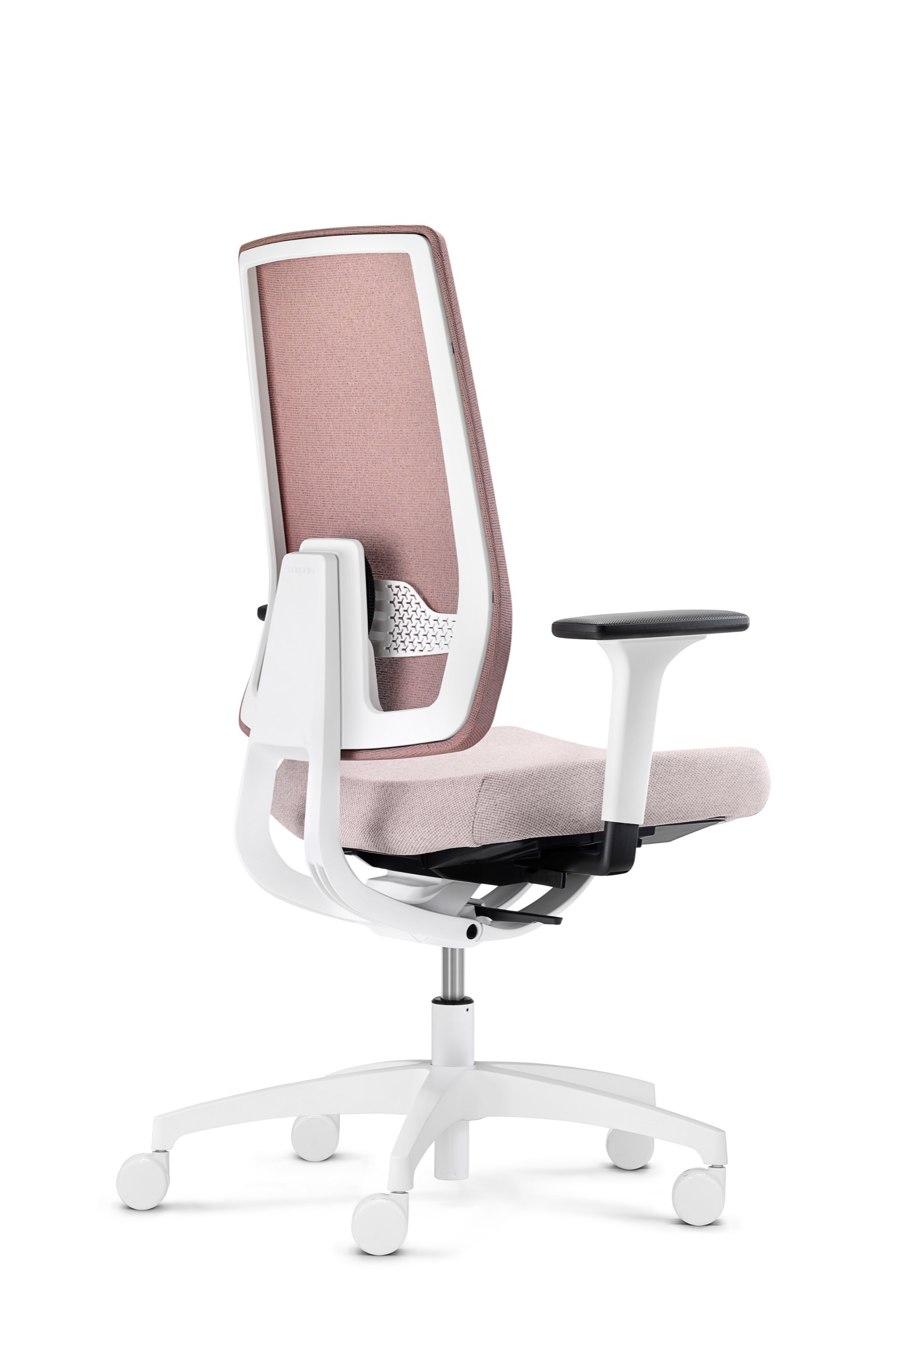 It's Automatic: Dauphin unveils the flexible office chair Indeed automatic | Novità